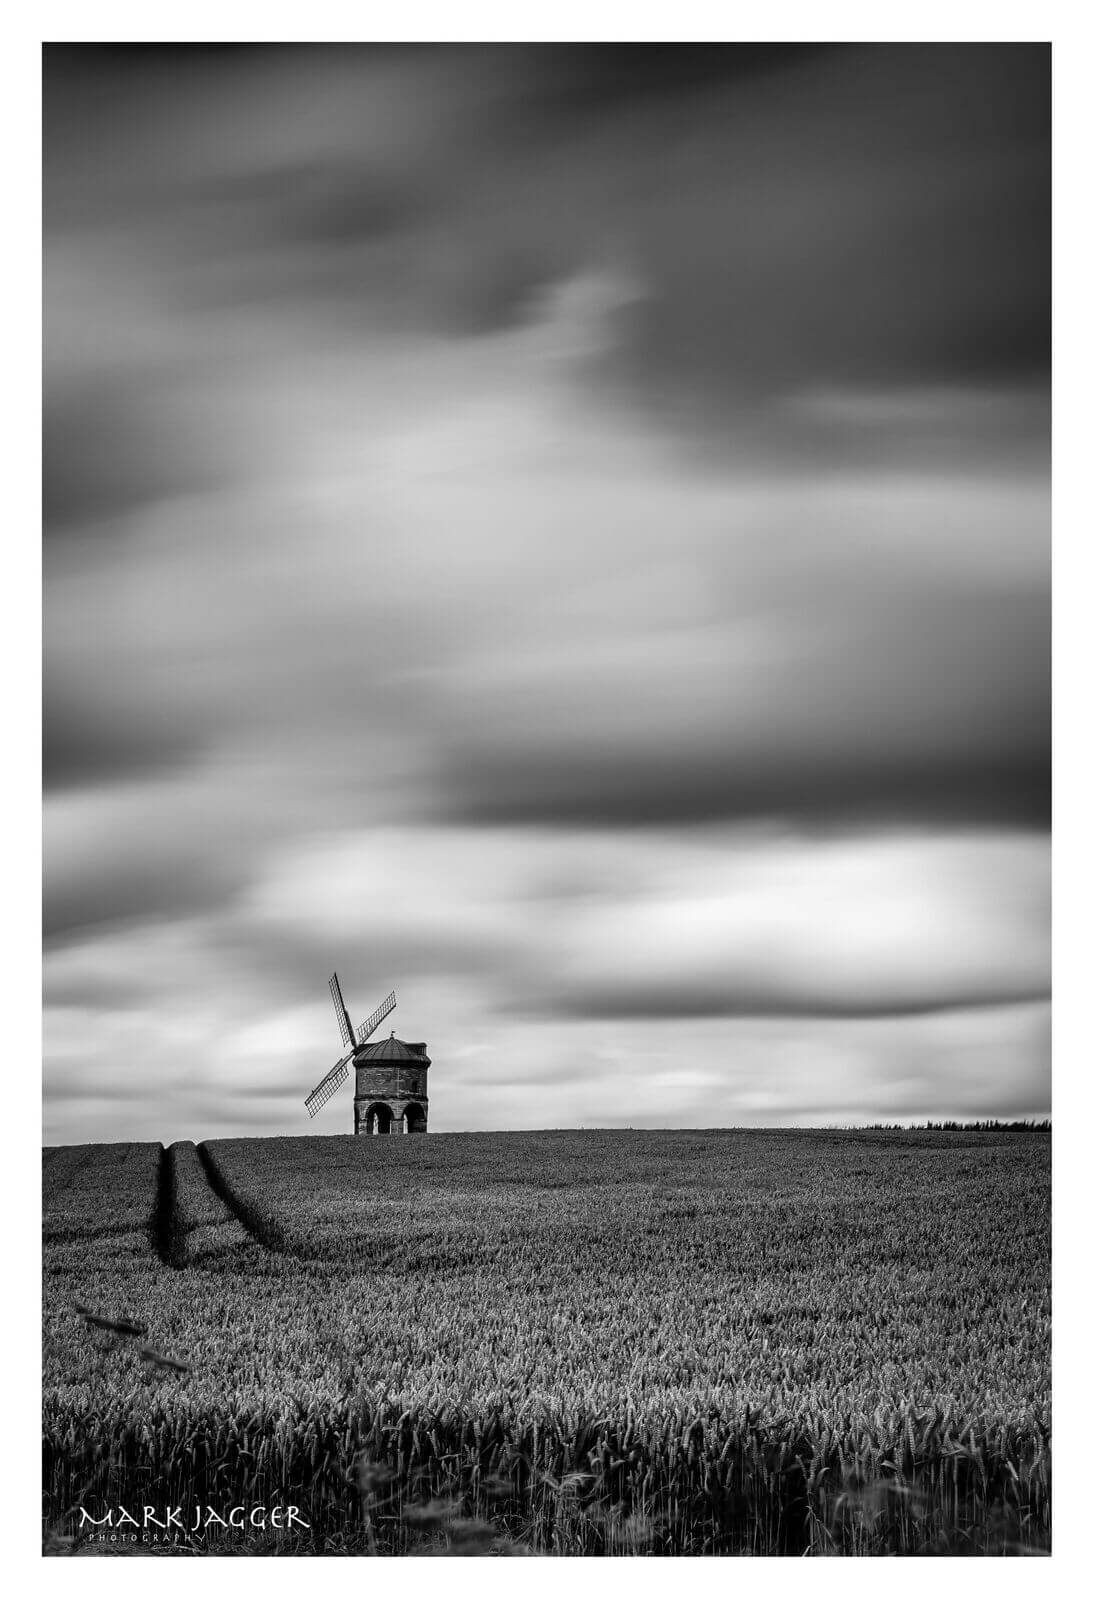 Image of Chesterton Windmill by Mark Jagger